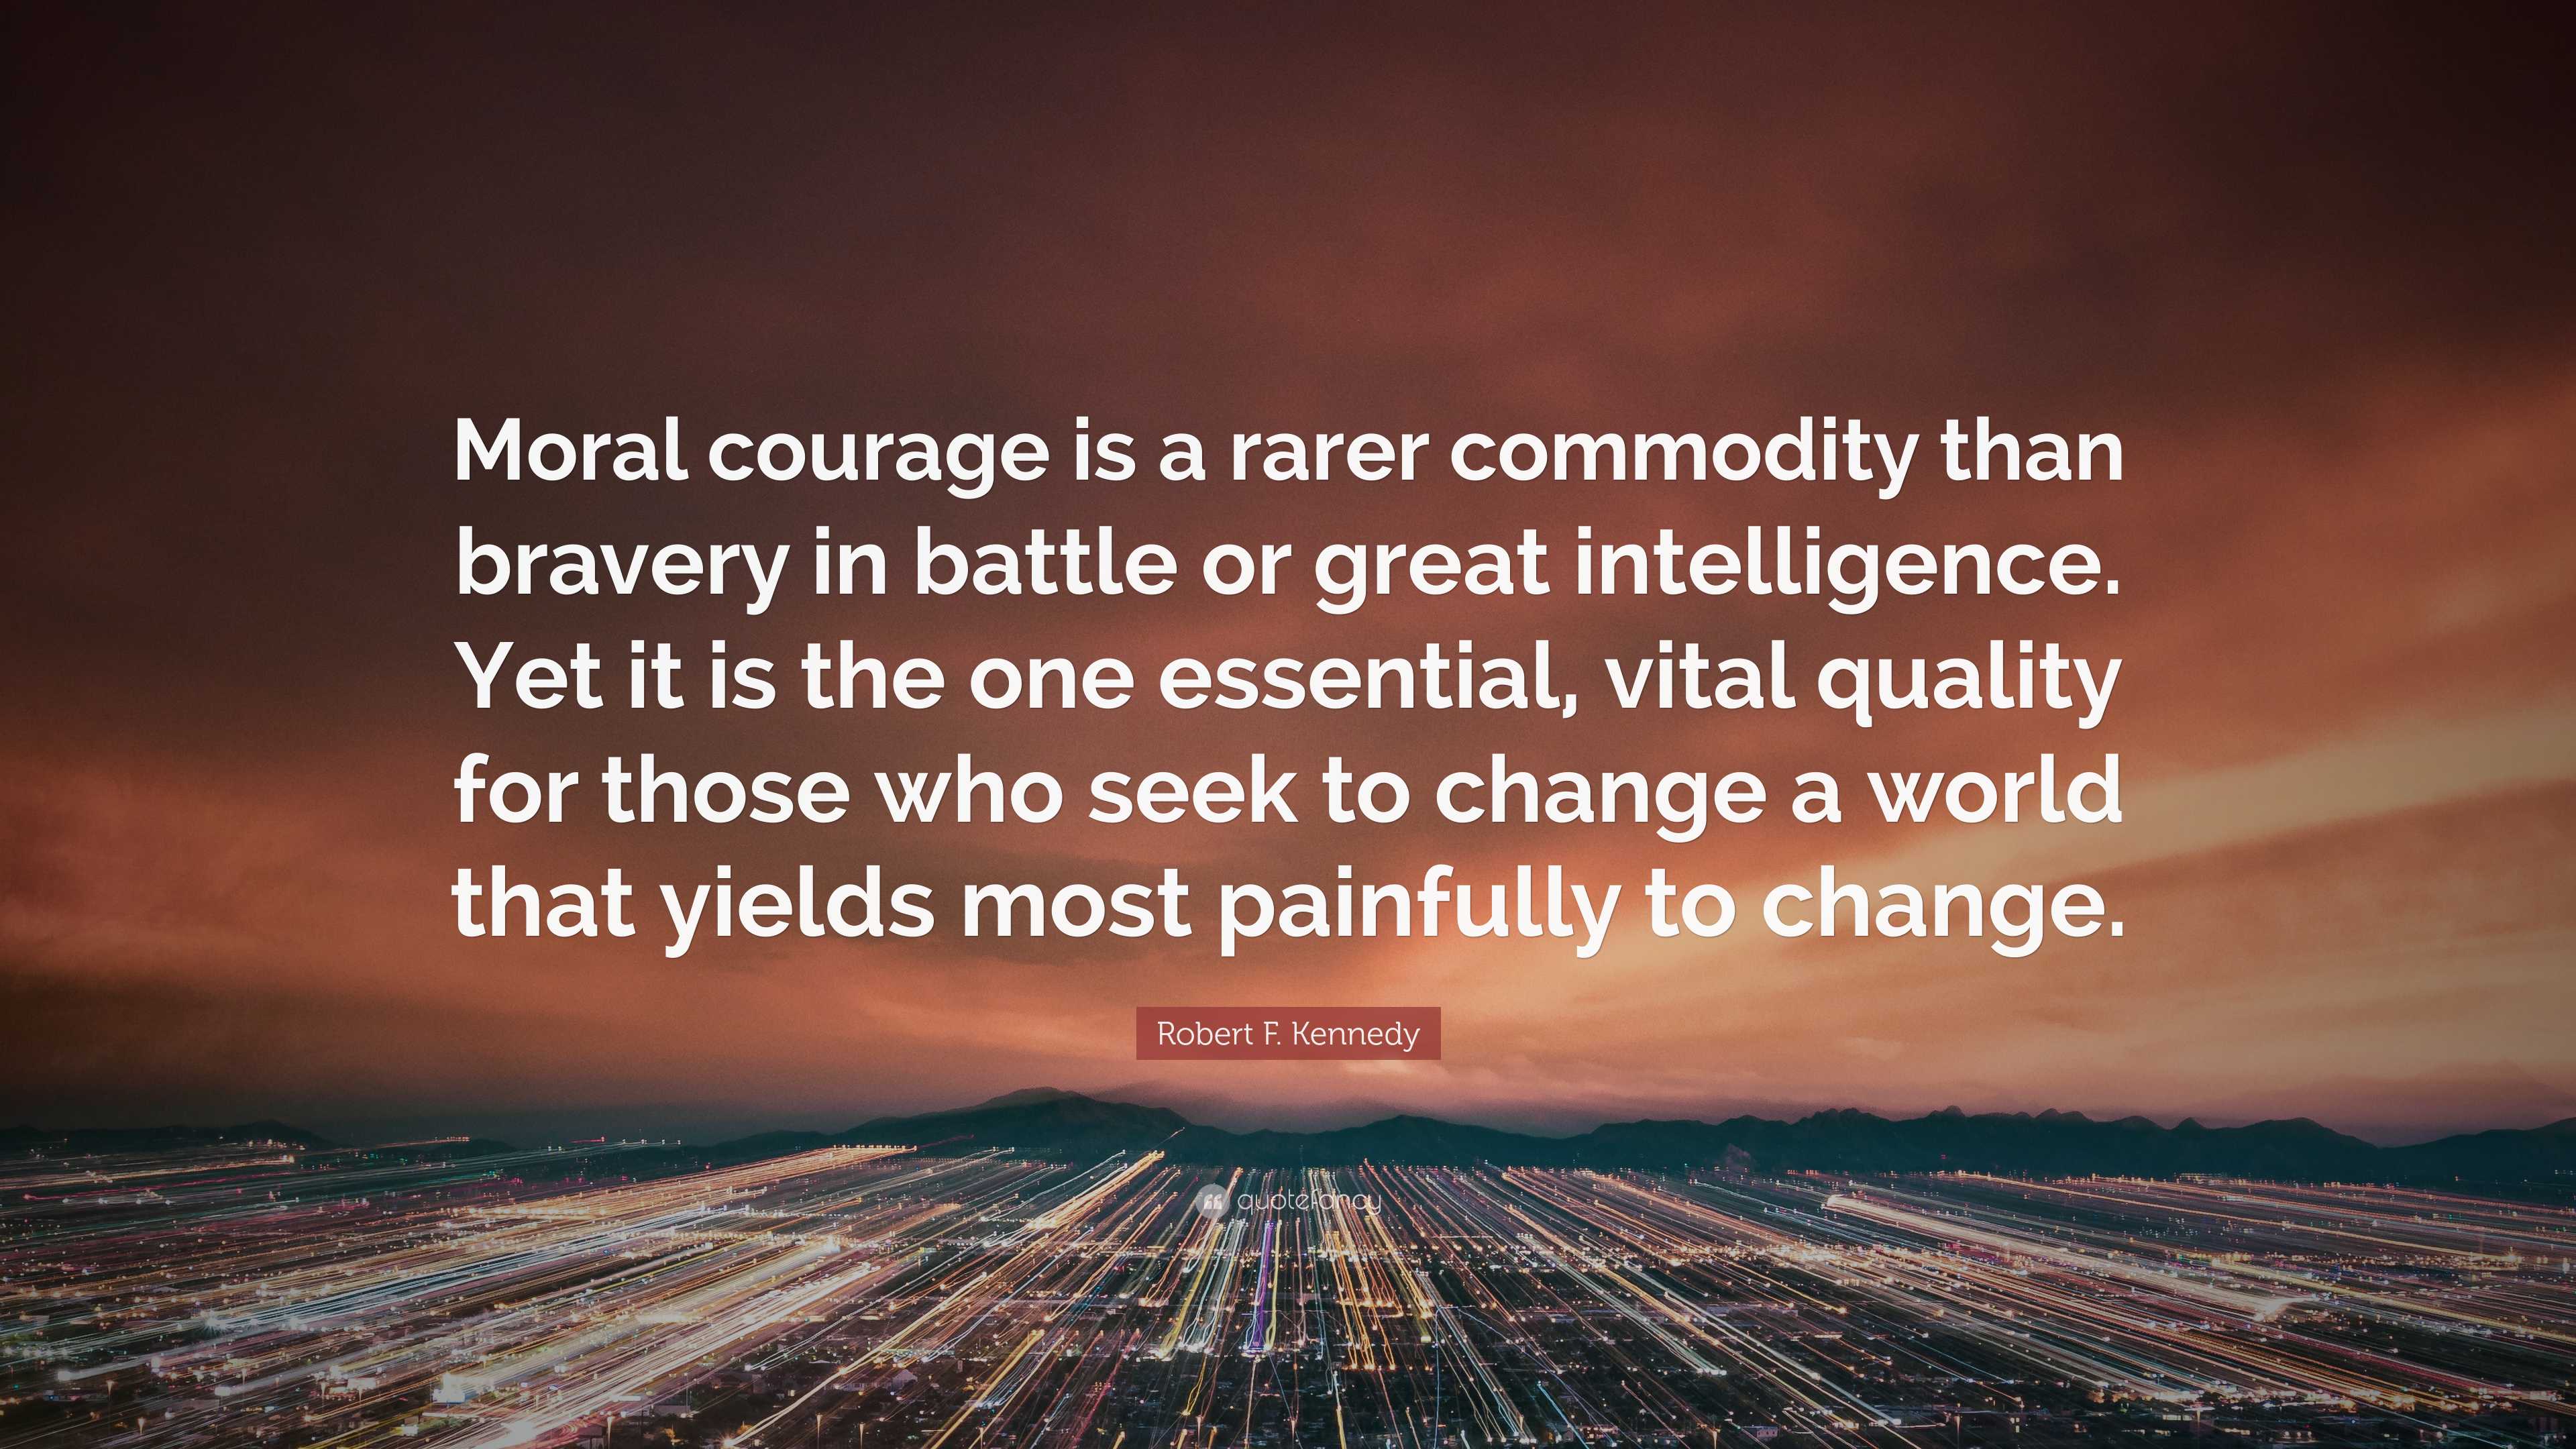 Robert F. Kennedy Quote: “Moral courage is a rarer commodity than